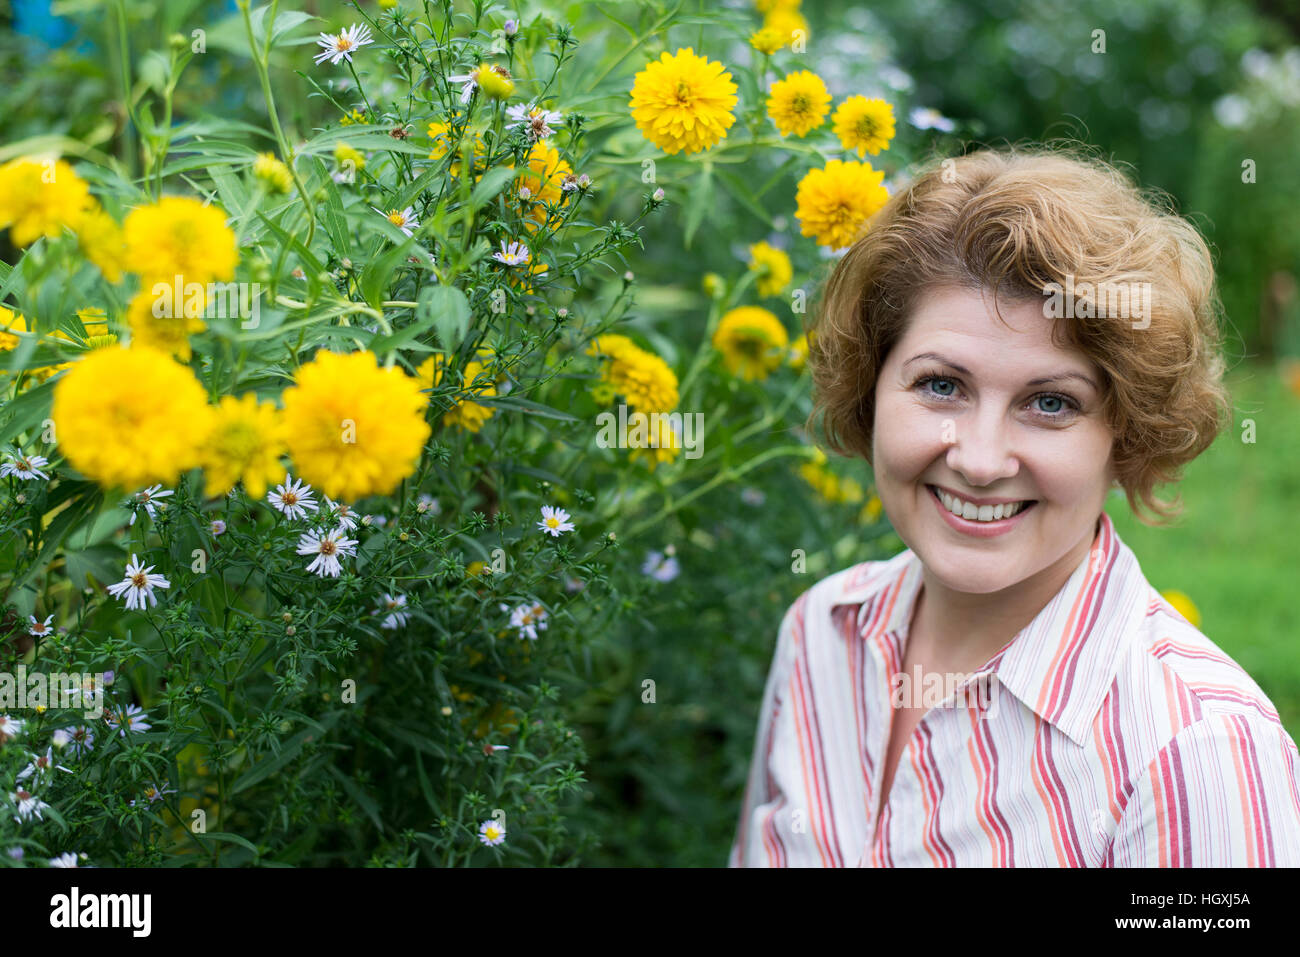 Smiling woman near yellow flowers in nature Stock Photo